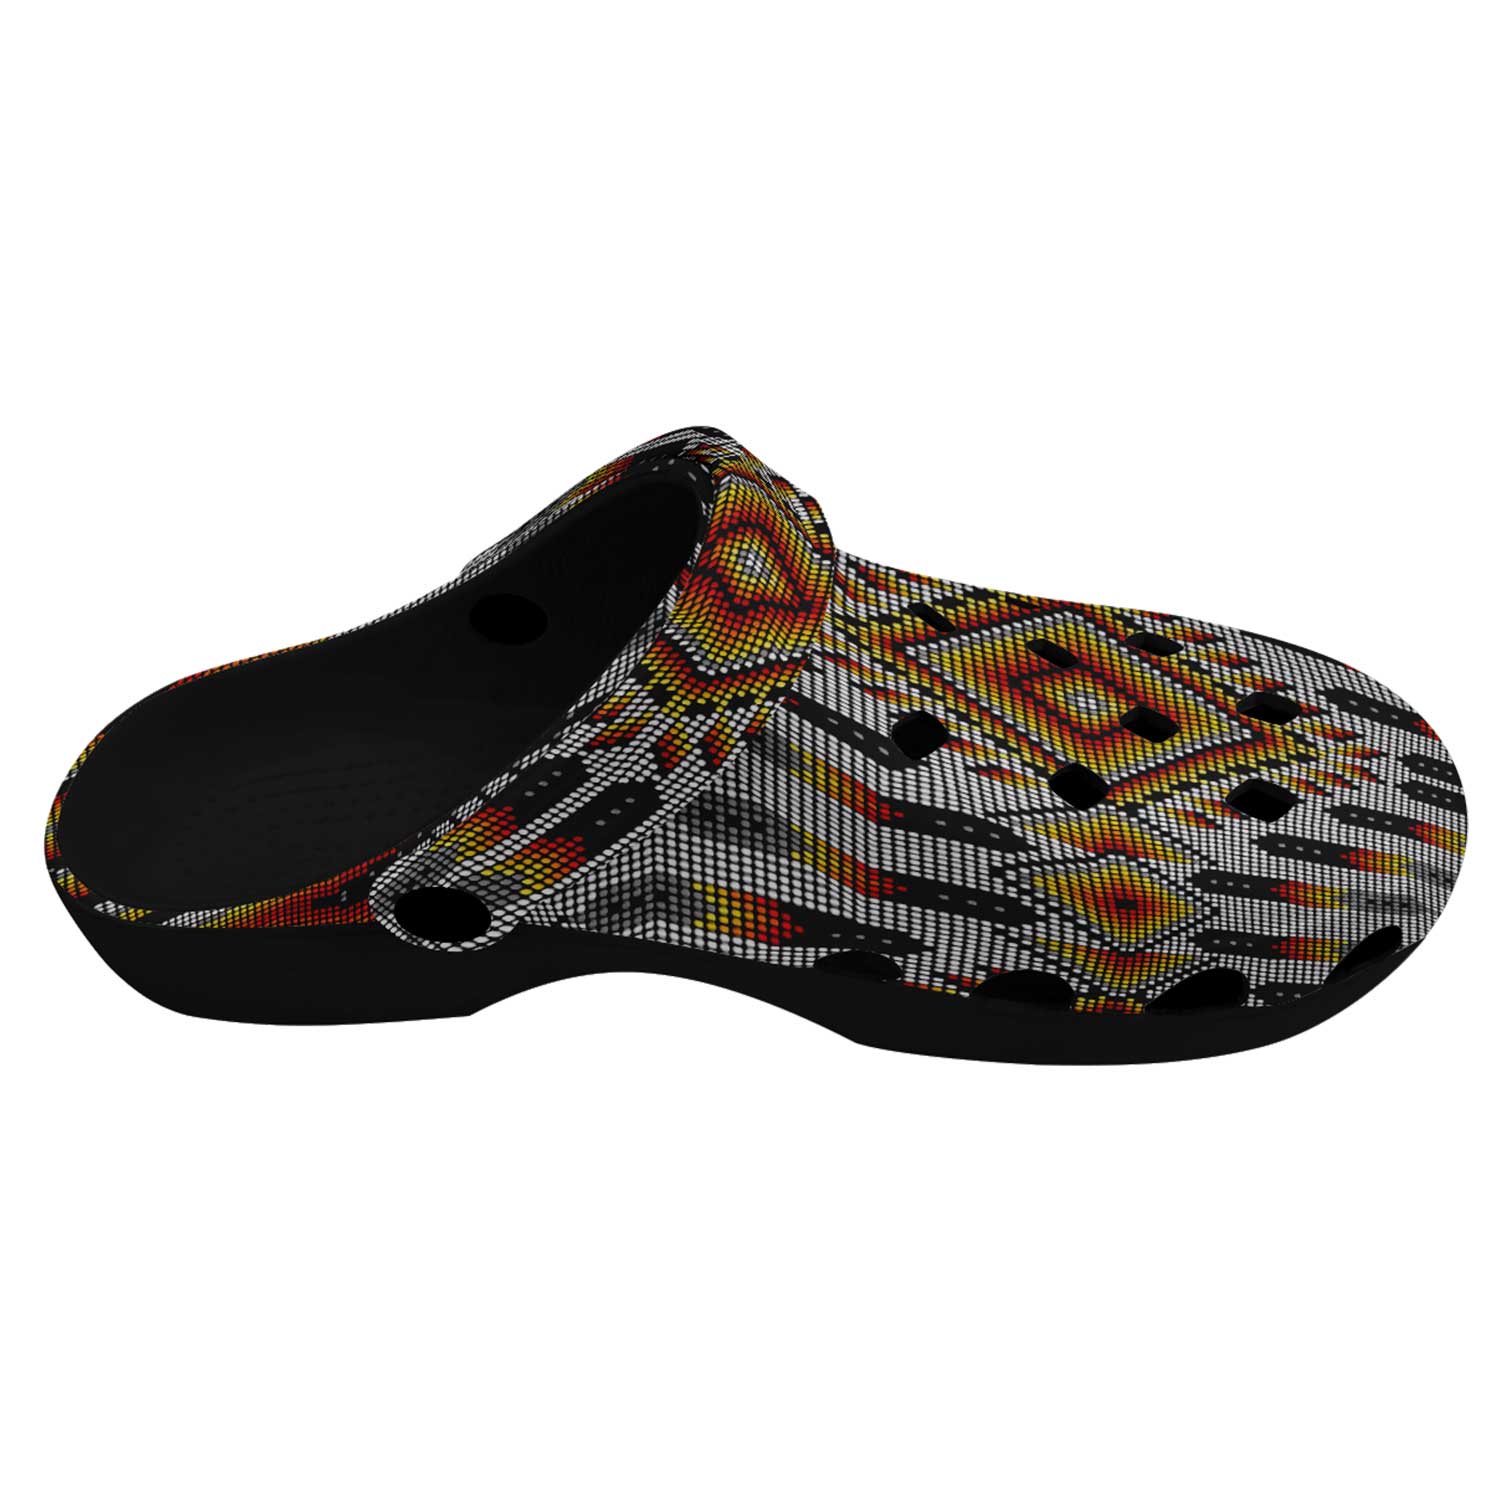 Fire Feather White Muddies Unisex Clog Shoes